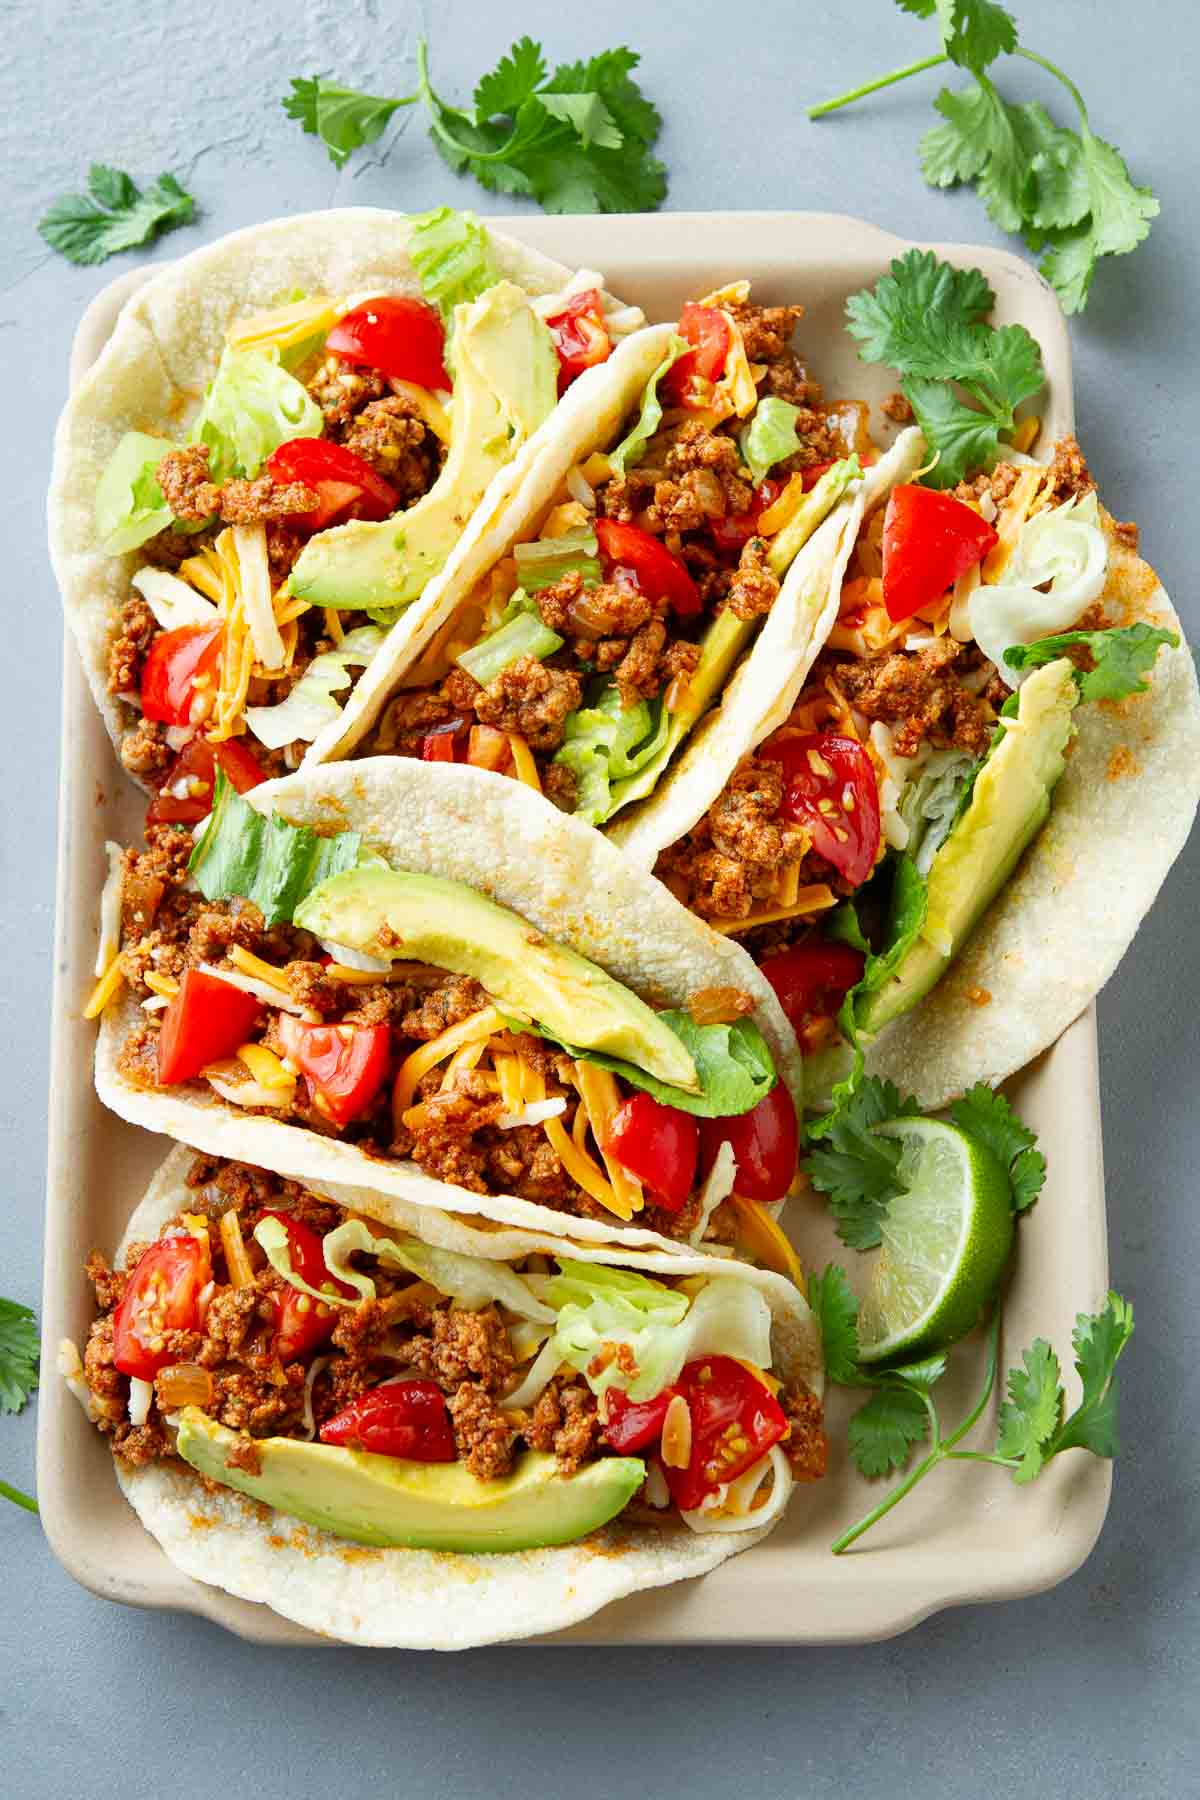 Enjoy a fuss-free taco night with these simple ground turkey tacos. Ground turkey taco meat is loaded into warm tortillas with your choice of toppings. | Recipes healthy